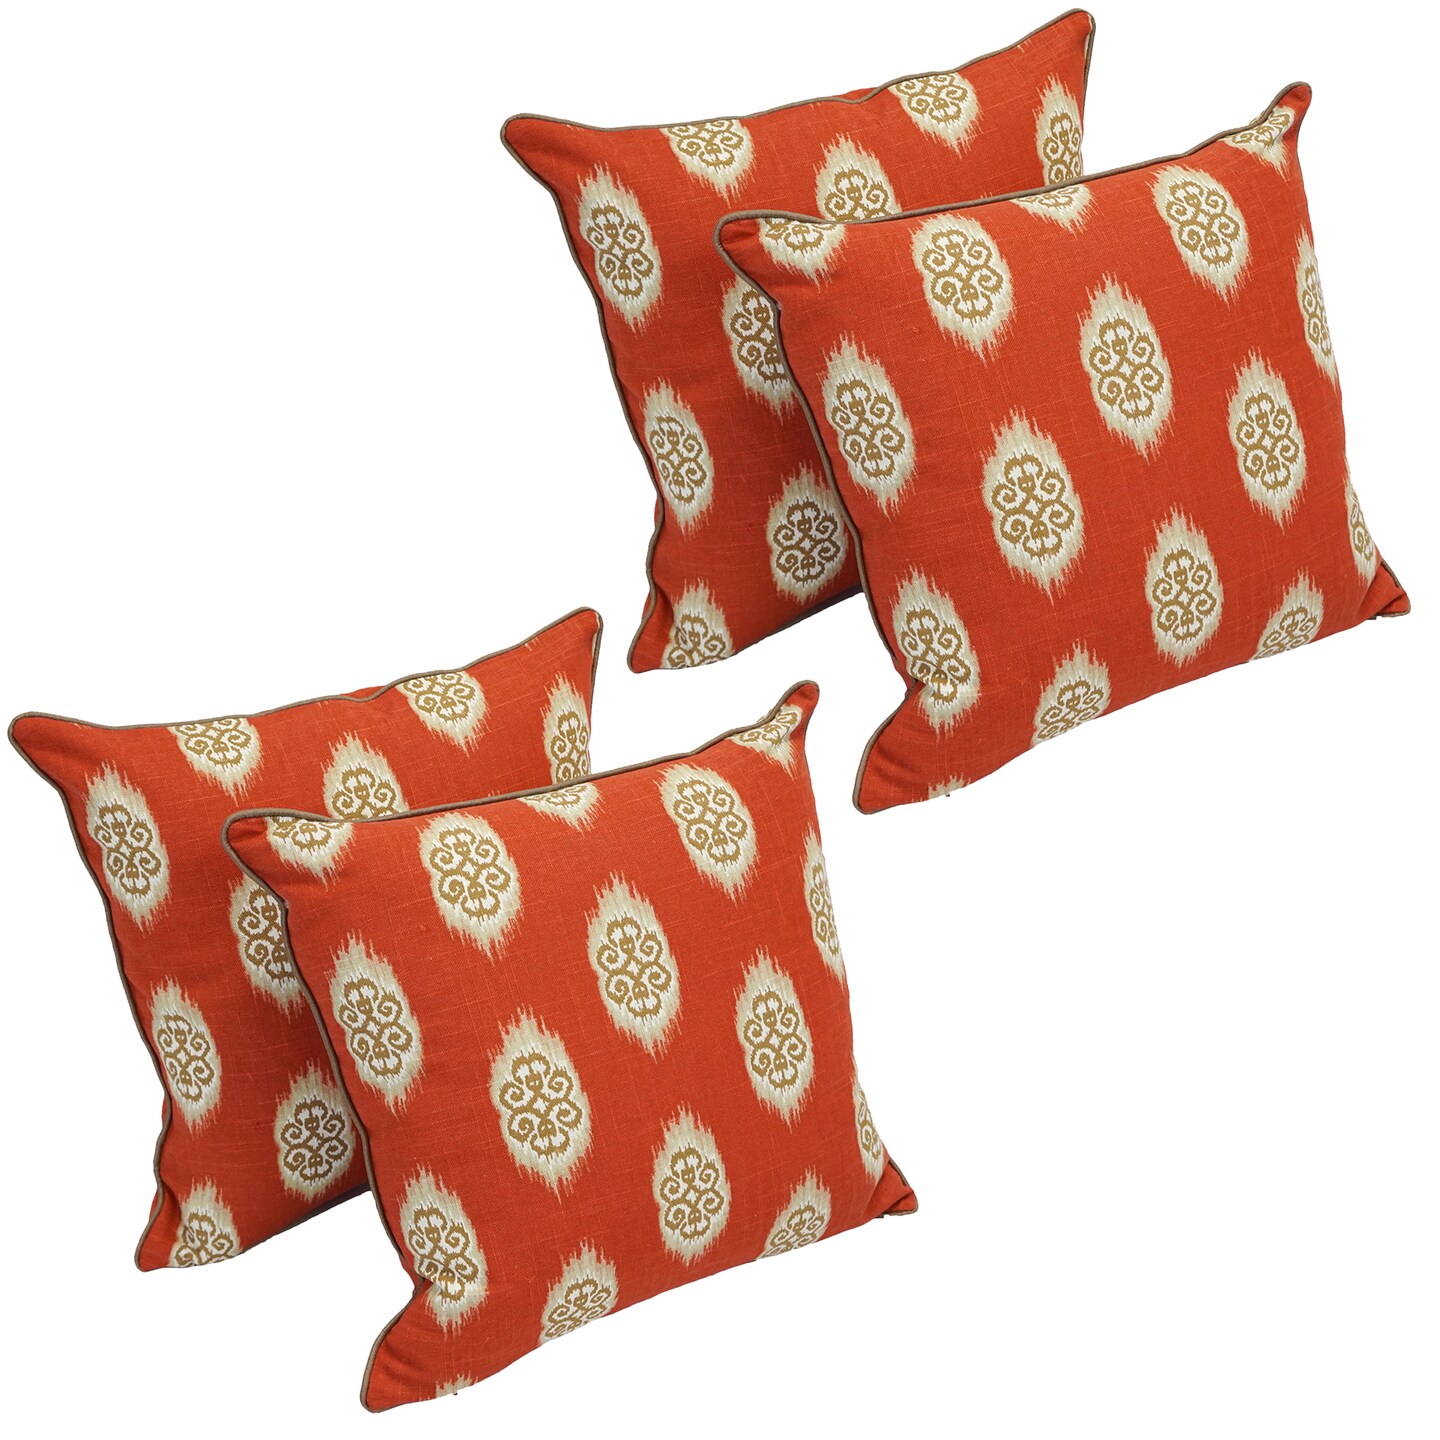 Blazing Needles 18-inch Corded Throw Pillows with Inserts (Set of